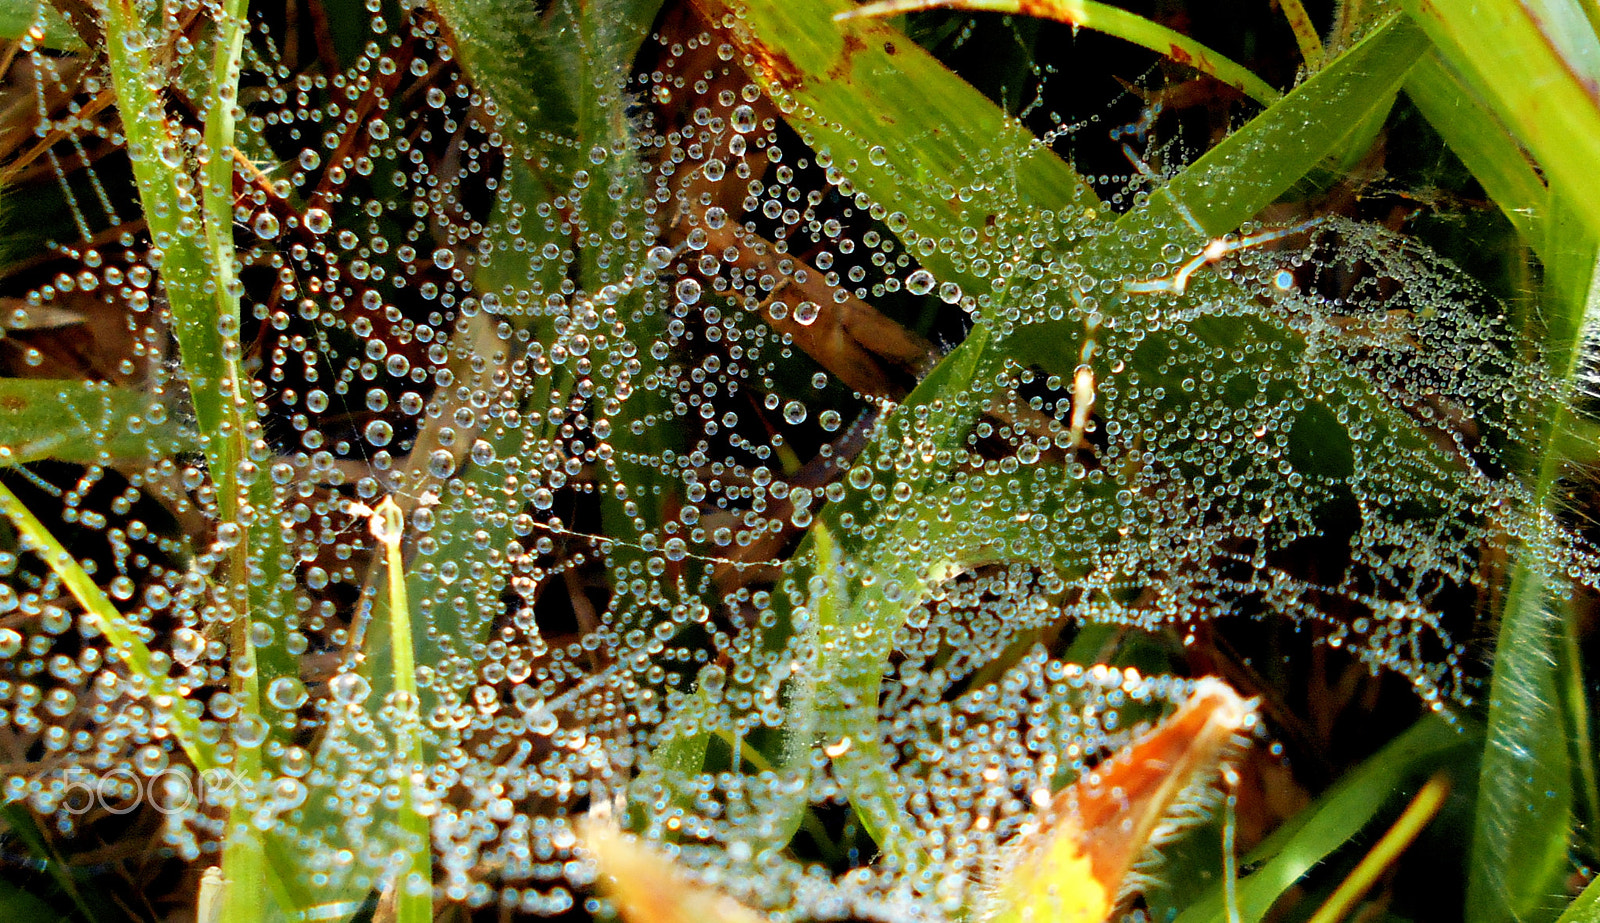 Nikon Coolpix L28 sample photo. Cobwebs with dew drops suspended photography